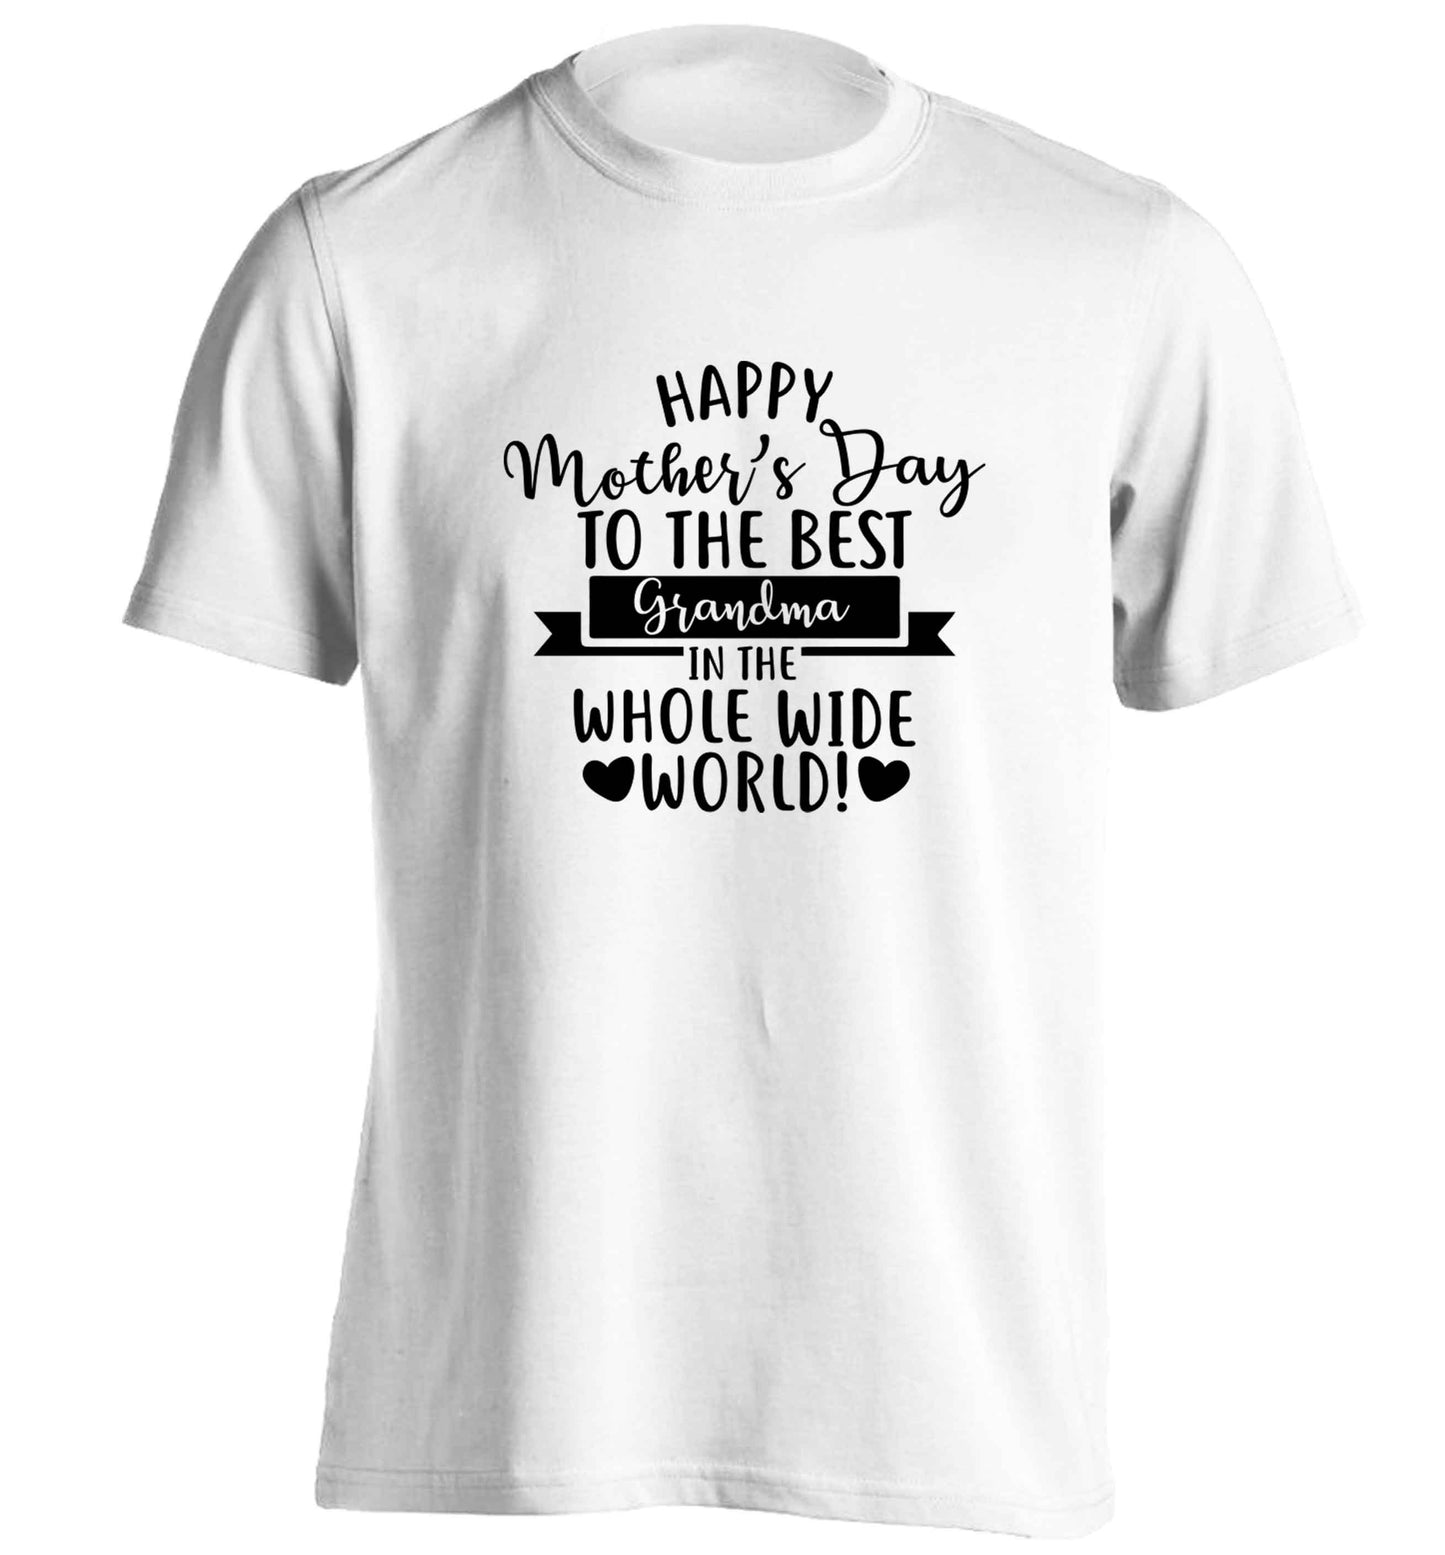 Happy mother's day to the best grandma in the world adults unisex white Tshirt 2XL